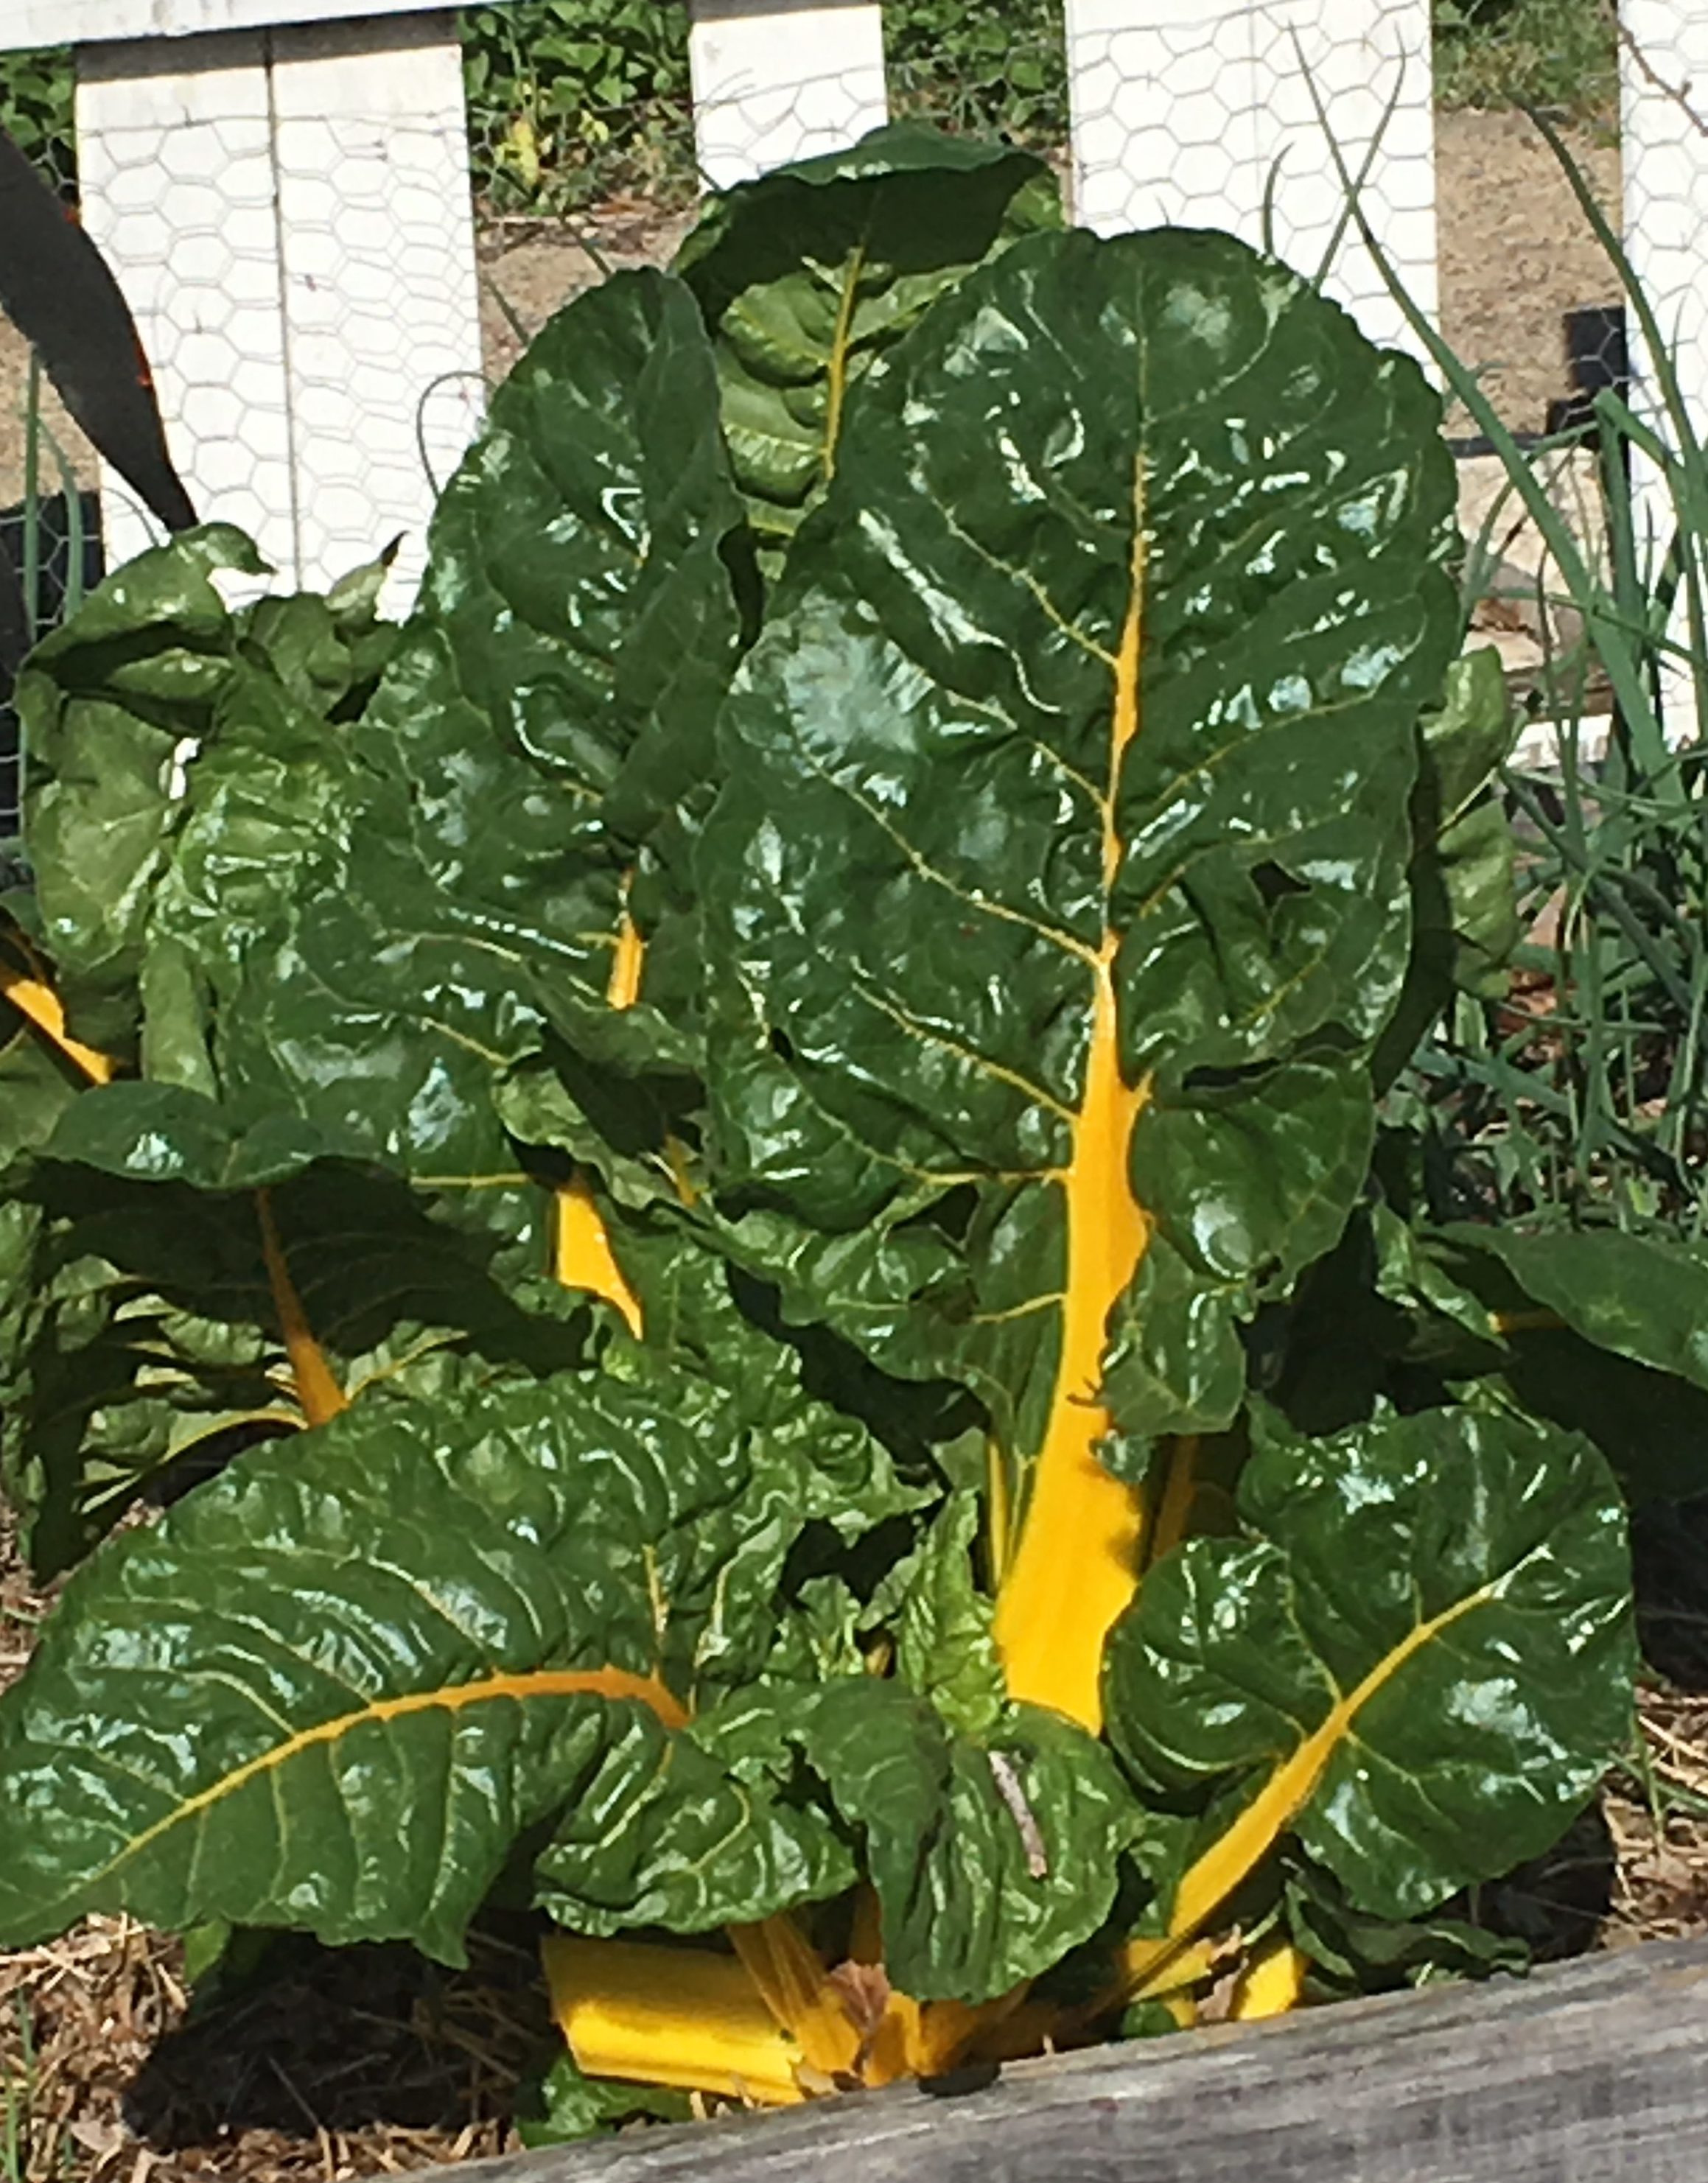 Garden to Table Recipe; Swiss Chard, The Jewel of the Spring Garden!